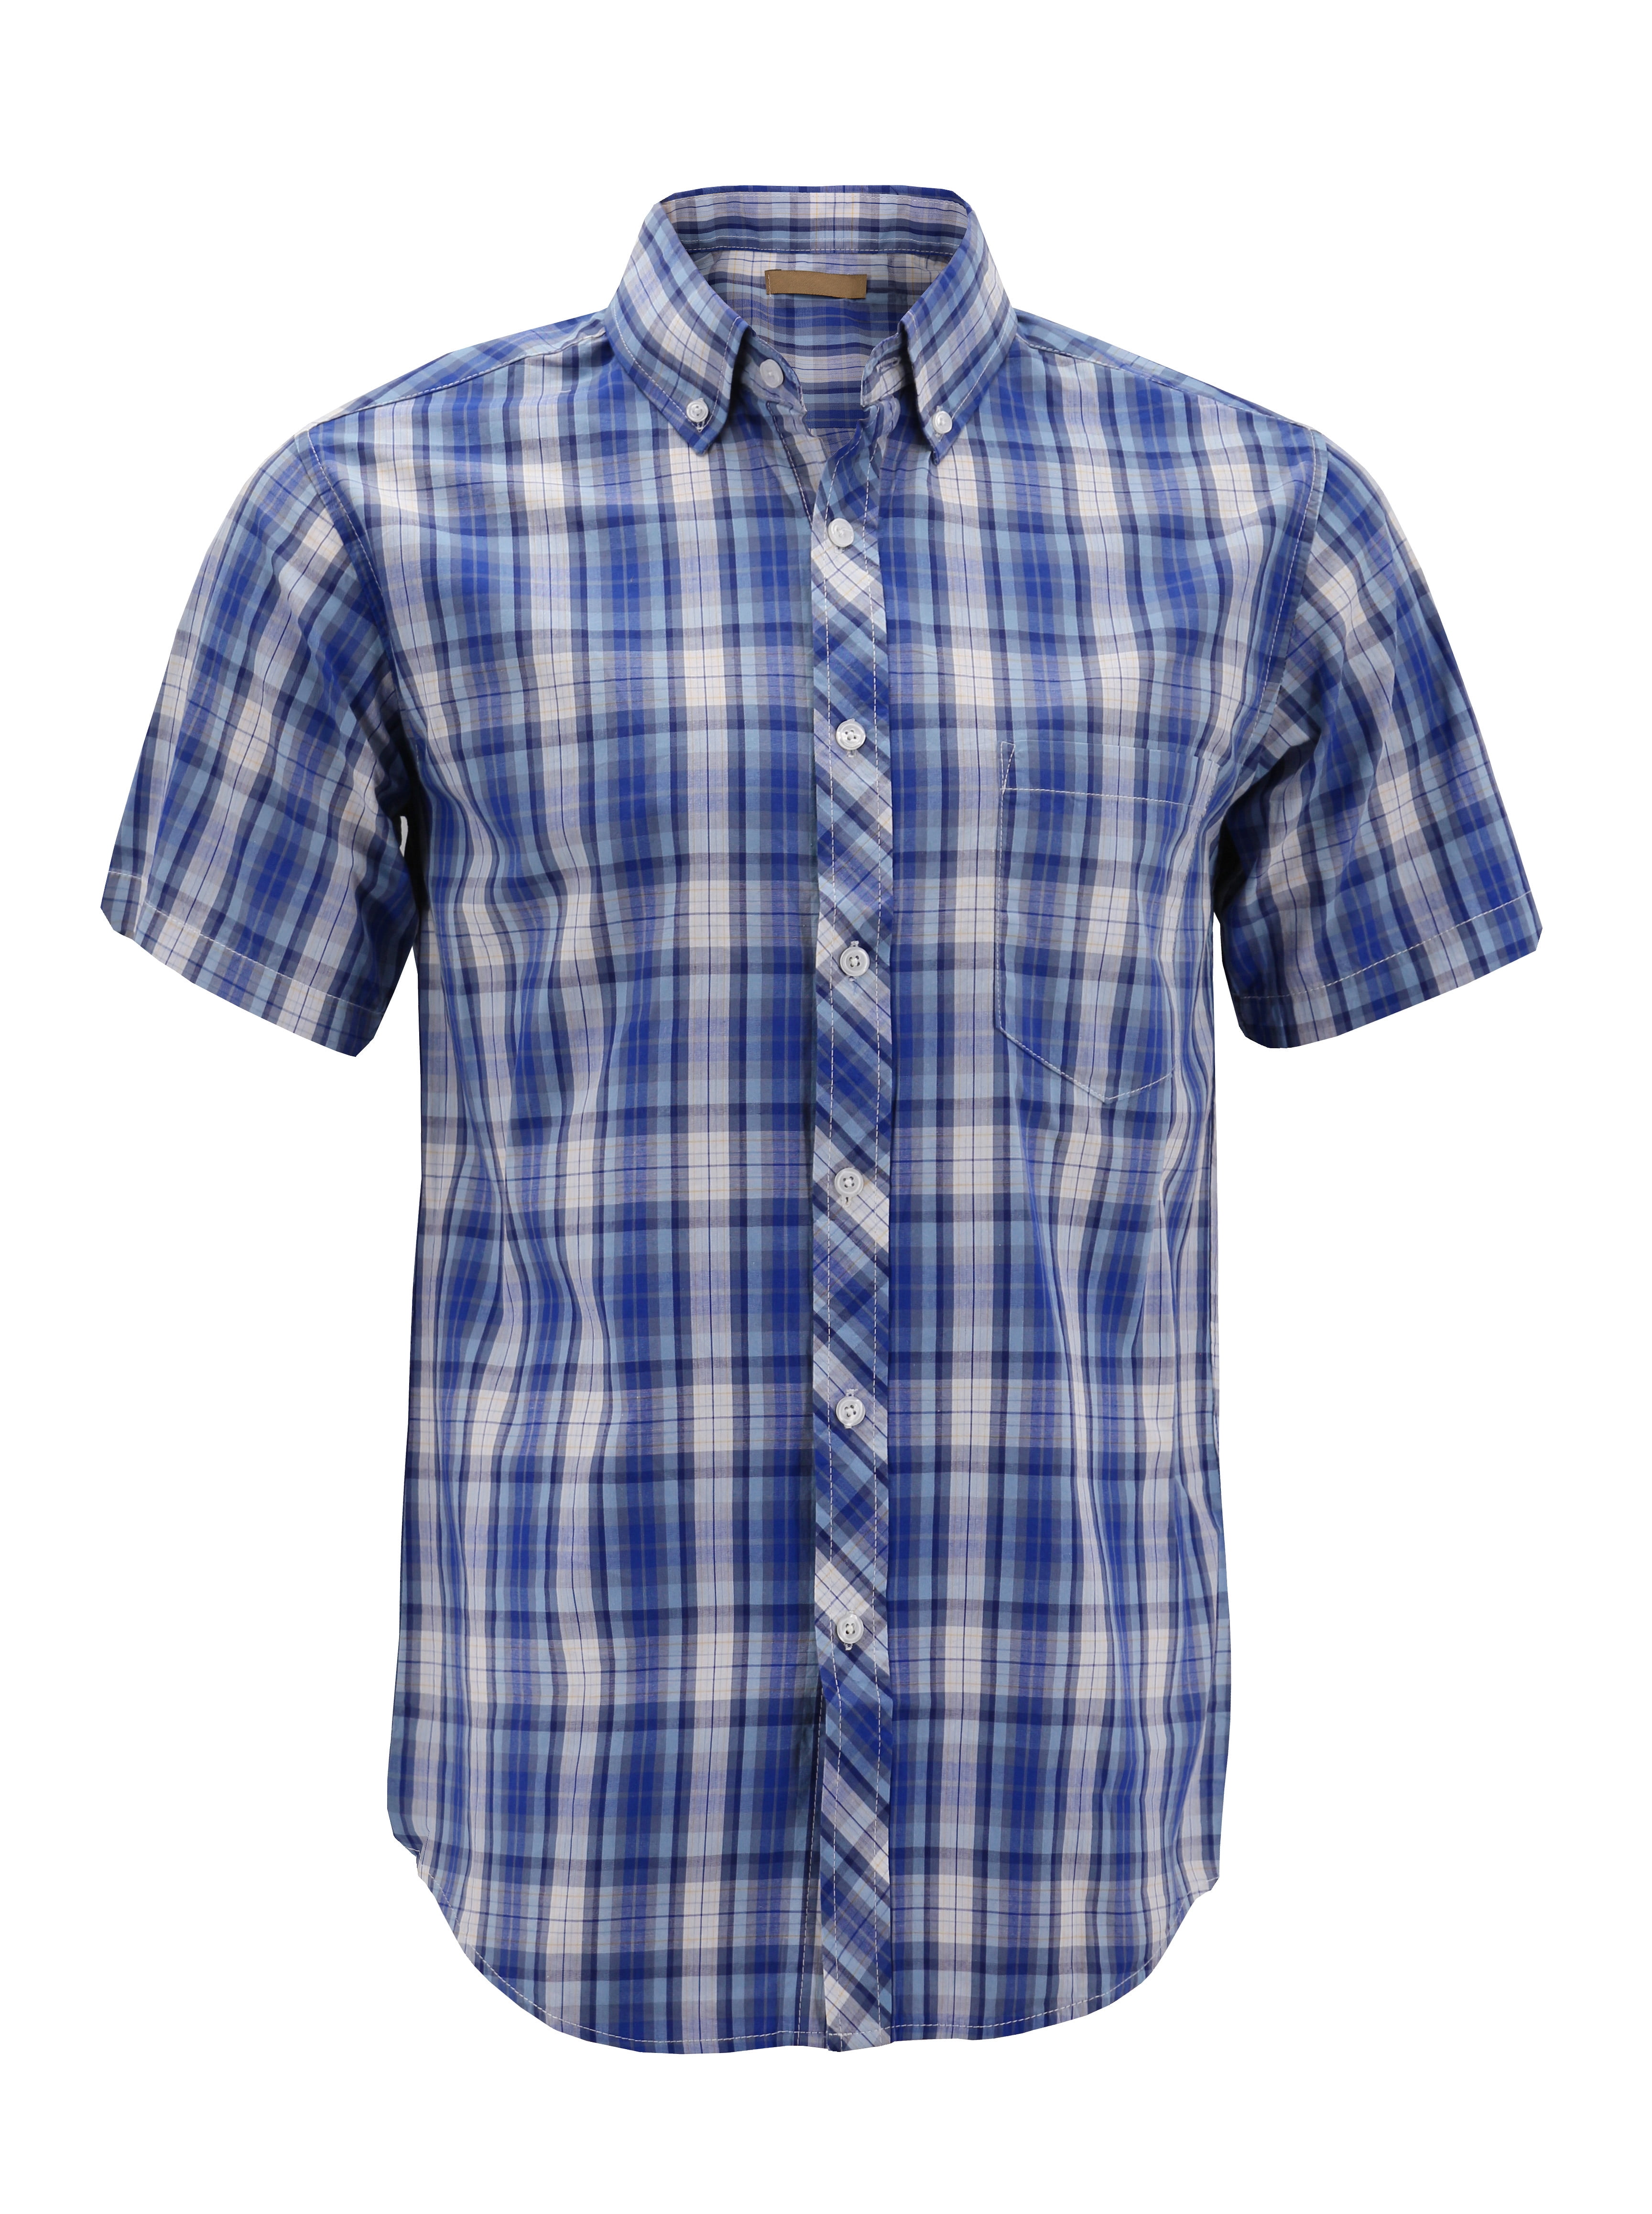 VKWEAR - Men’s Cotton Casual Short Sleeve Classic Collared Plaid Button